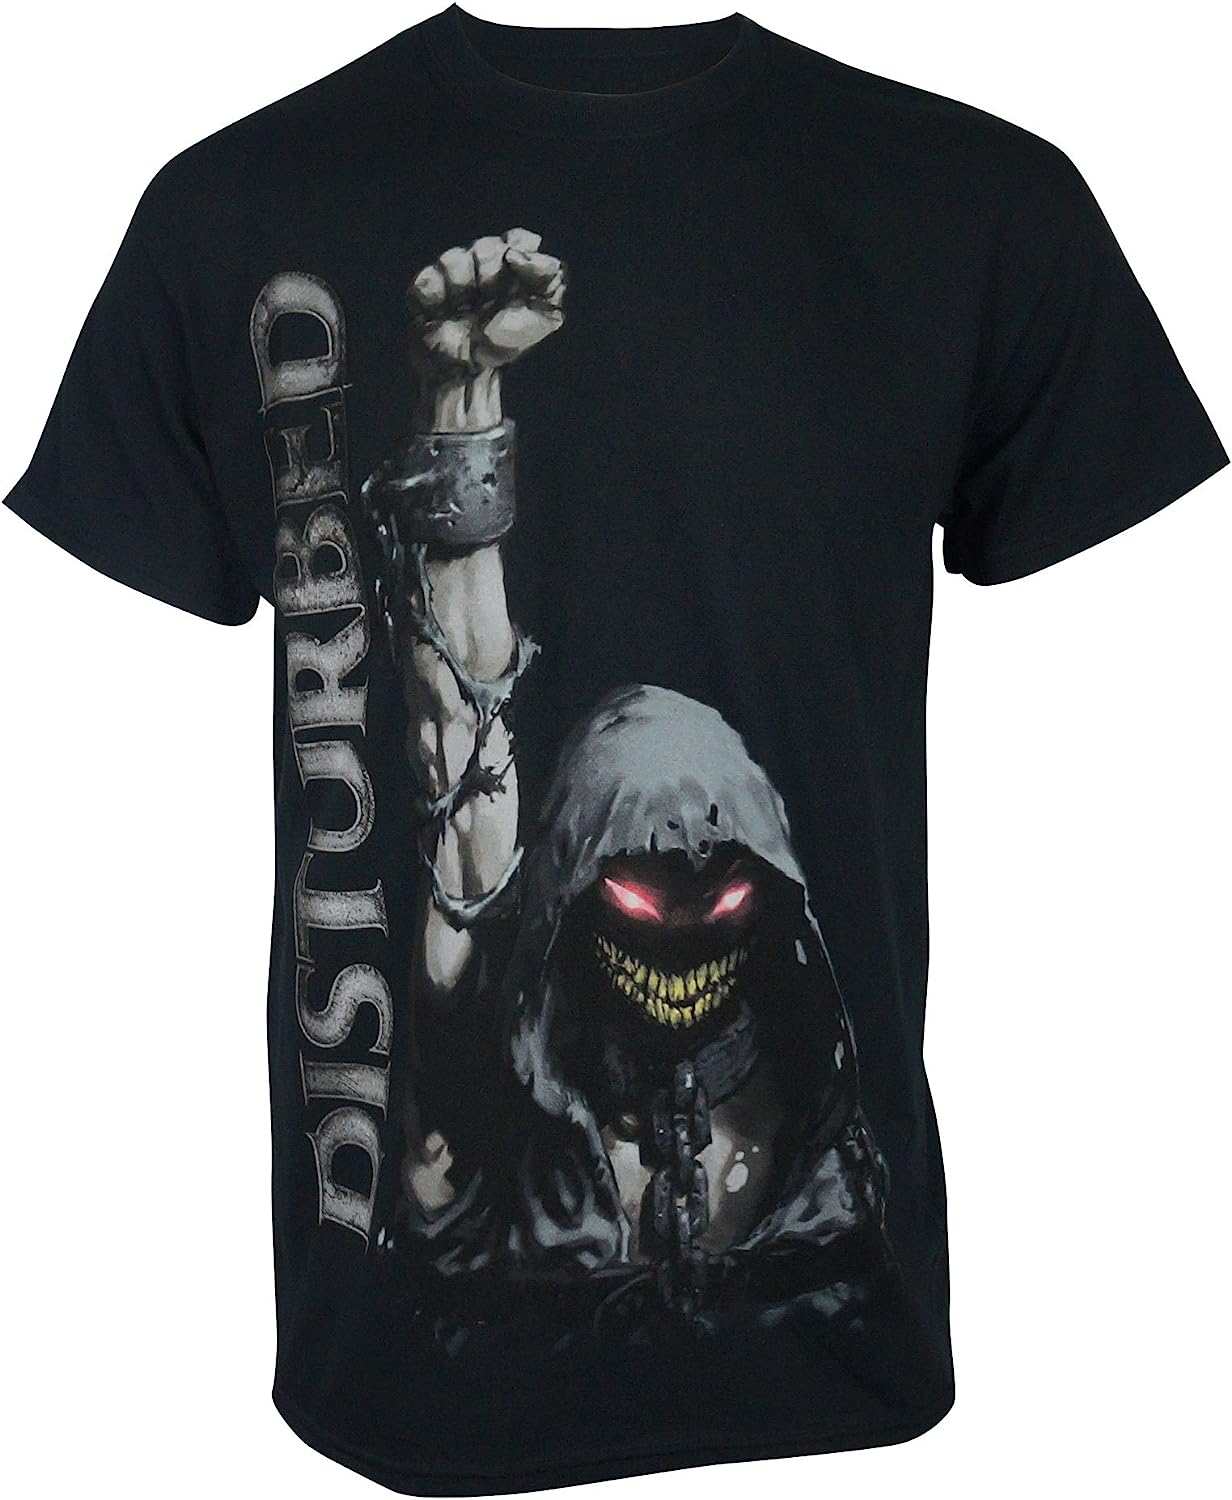 Disturbed Up Your Fist T-shirt - Licensed